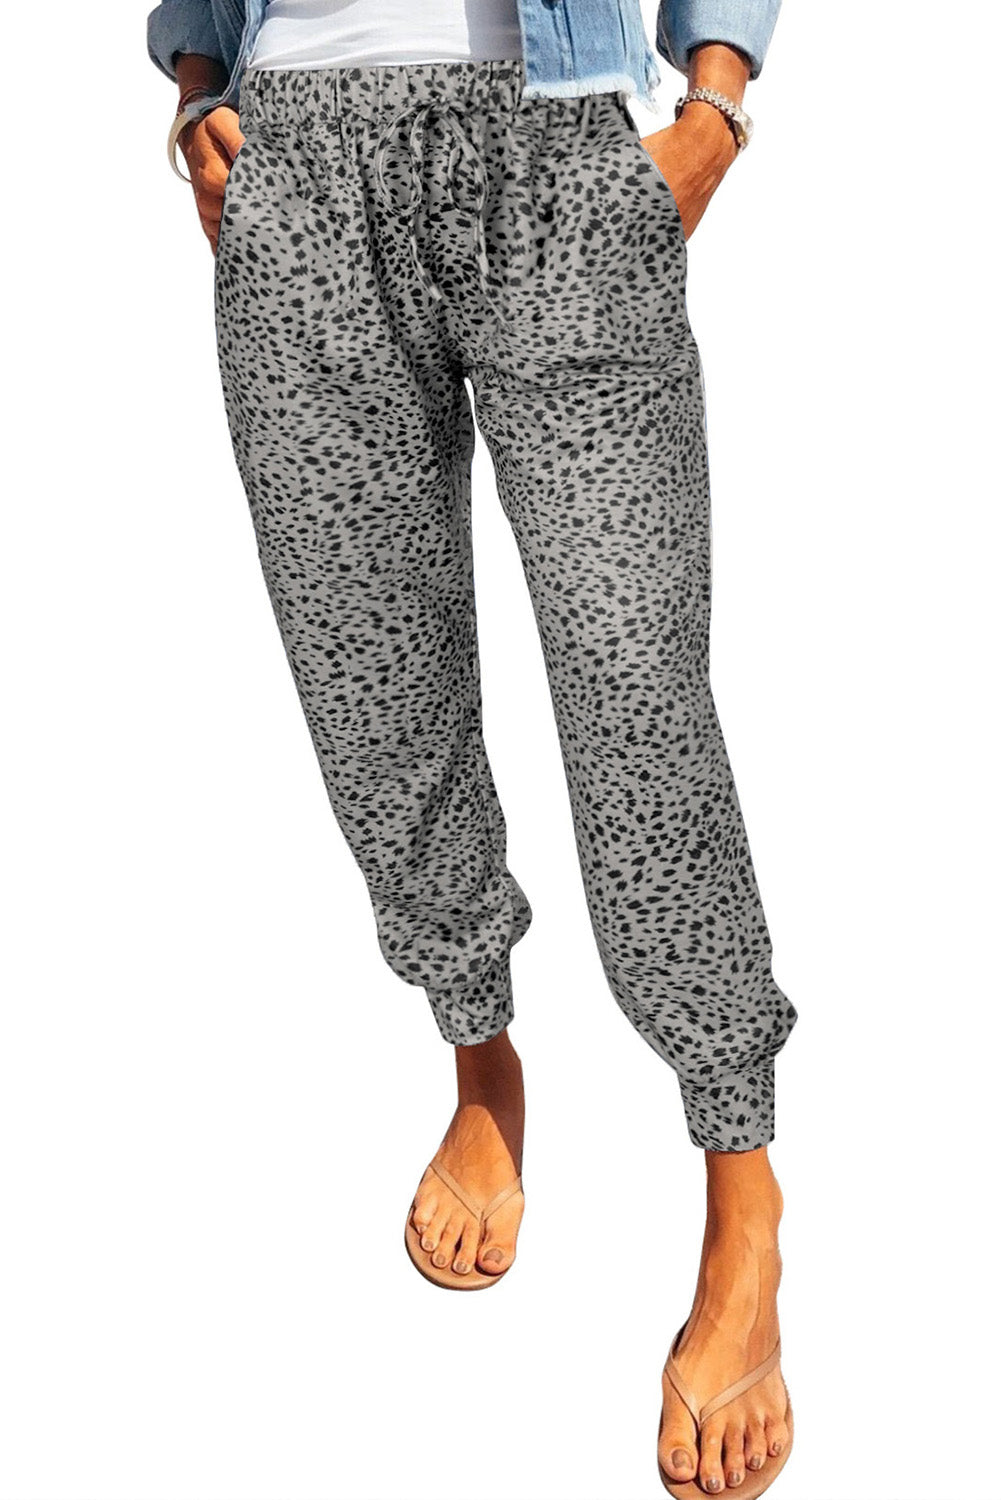 Leopard Pocketed Joggers